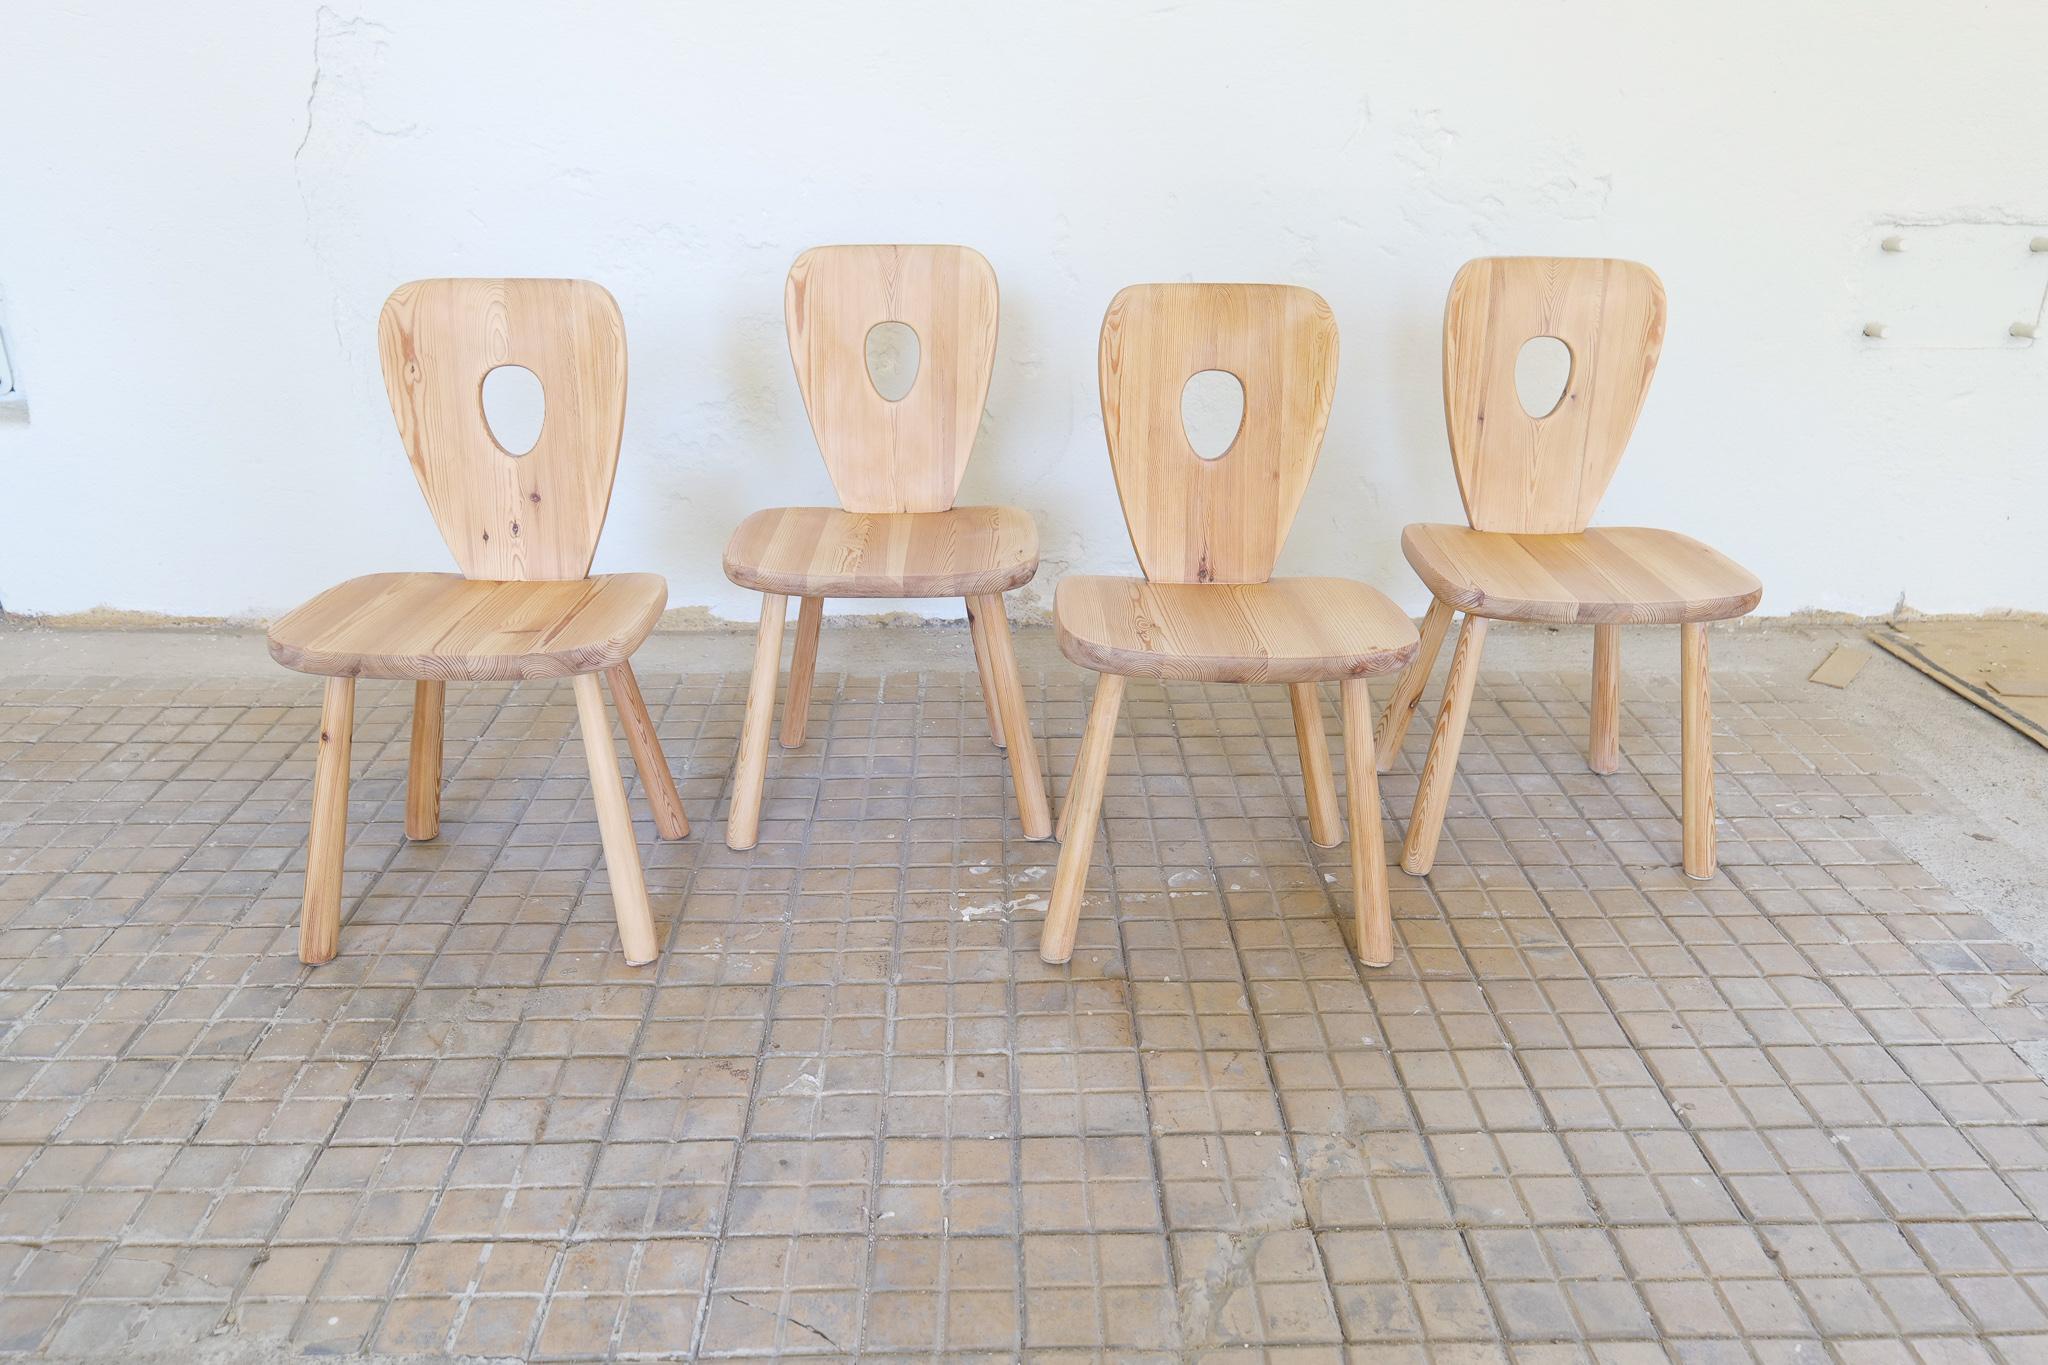 Mid-20th Century Swedish Sculptural Dining Chairs in Pine Bo Fjaestad, Sweden 1930s For Sale